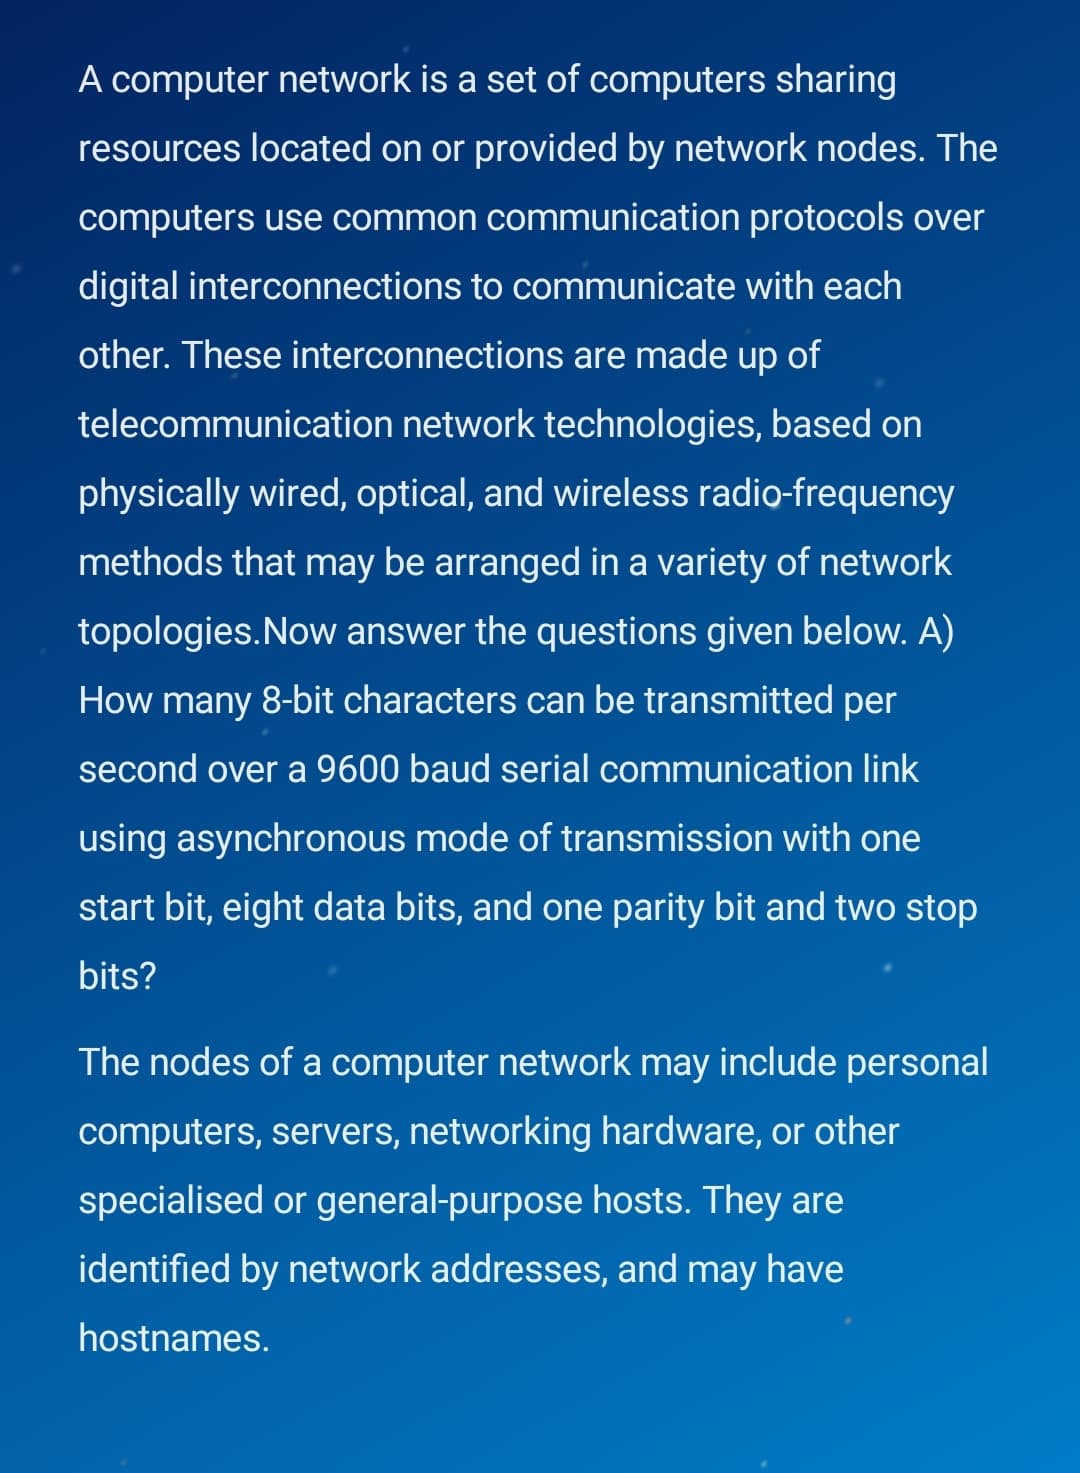 A computer network is a set of computers sharing
resources located on or provided by network nodes. The
computers use common communication protocols over
digital interconnections to communicate with each
other. These interconnections are made up of
telecommunication network technologies, based on
physically wired, optical, and wireless radio-frequency
methods that may be arranged in a variety of network
topologies.Now answer the questions given below. A)
How many 8-bit characters can be transmitted per
second over a 9600 baud serial communication link
using asynchronous mode of transmission with one
start bit, eight data bits, and one parity bit and two stop
bits?
The nodes of a computer network may include personal
computers, servers, networking hardware, or other
specialised or general-purpose hosts. They are
identified by network addresses, and may have
hostnames.
